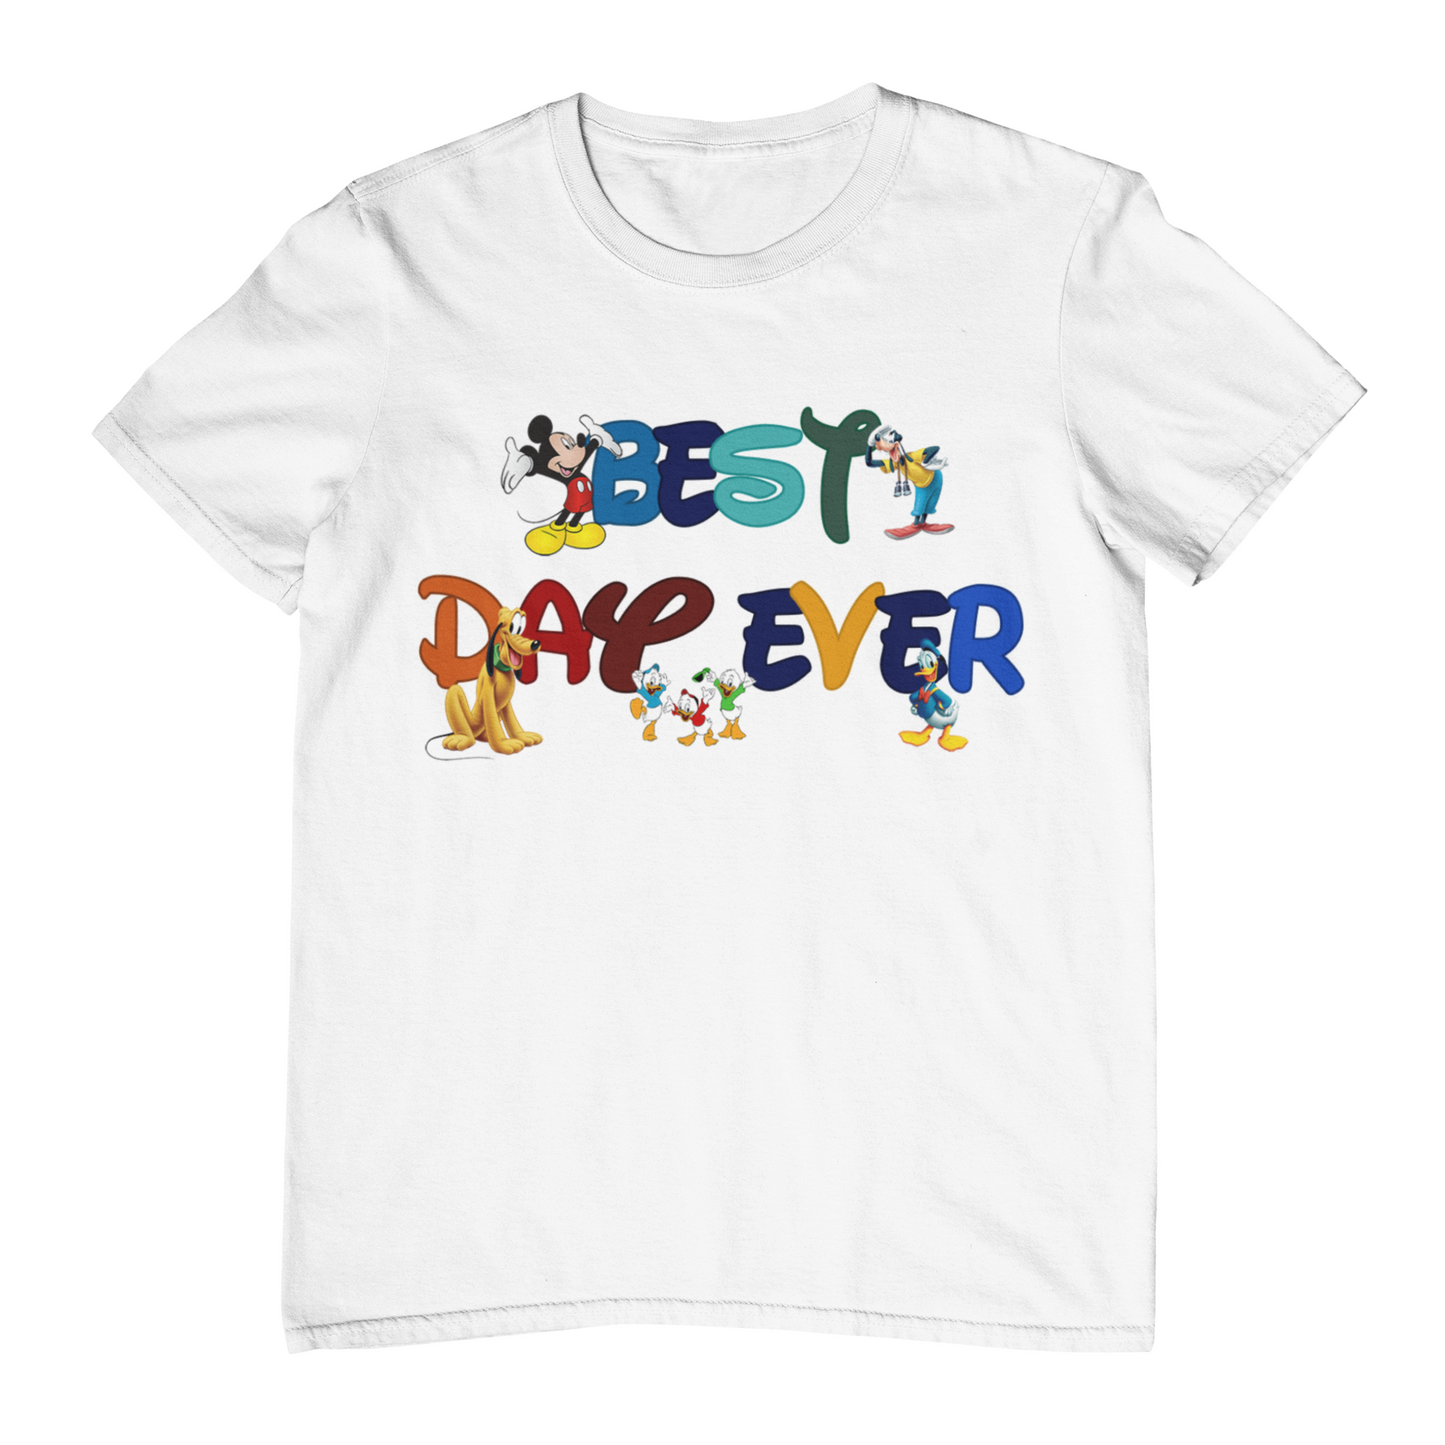 BEST DAY EVER Mickey and friends boys shirts - Mickey best day ever shirt - Boys shirts - Custom shirts - Shirts